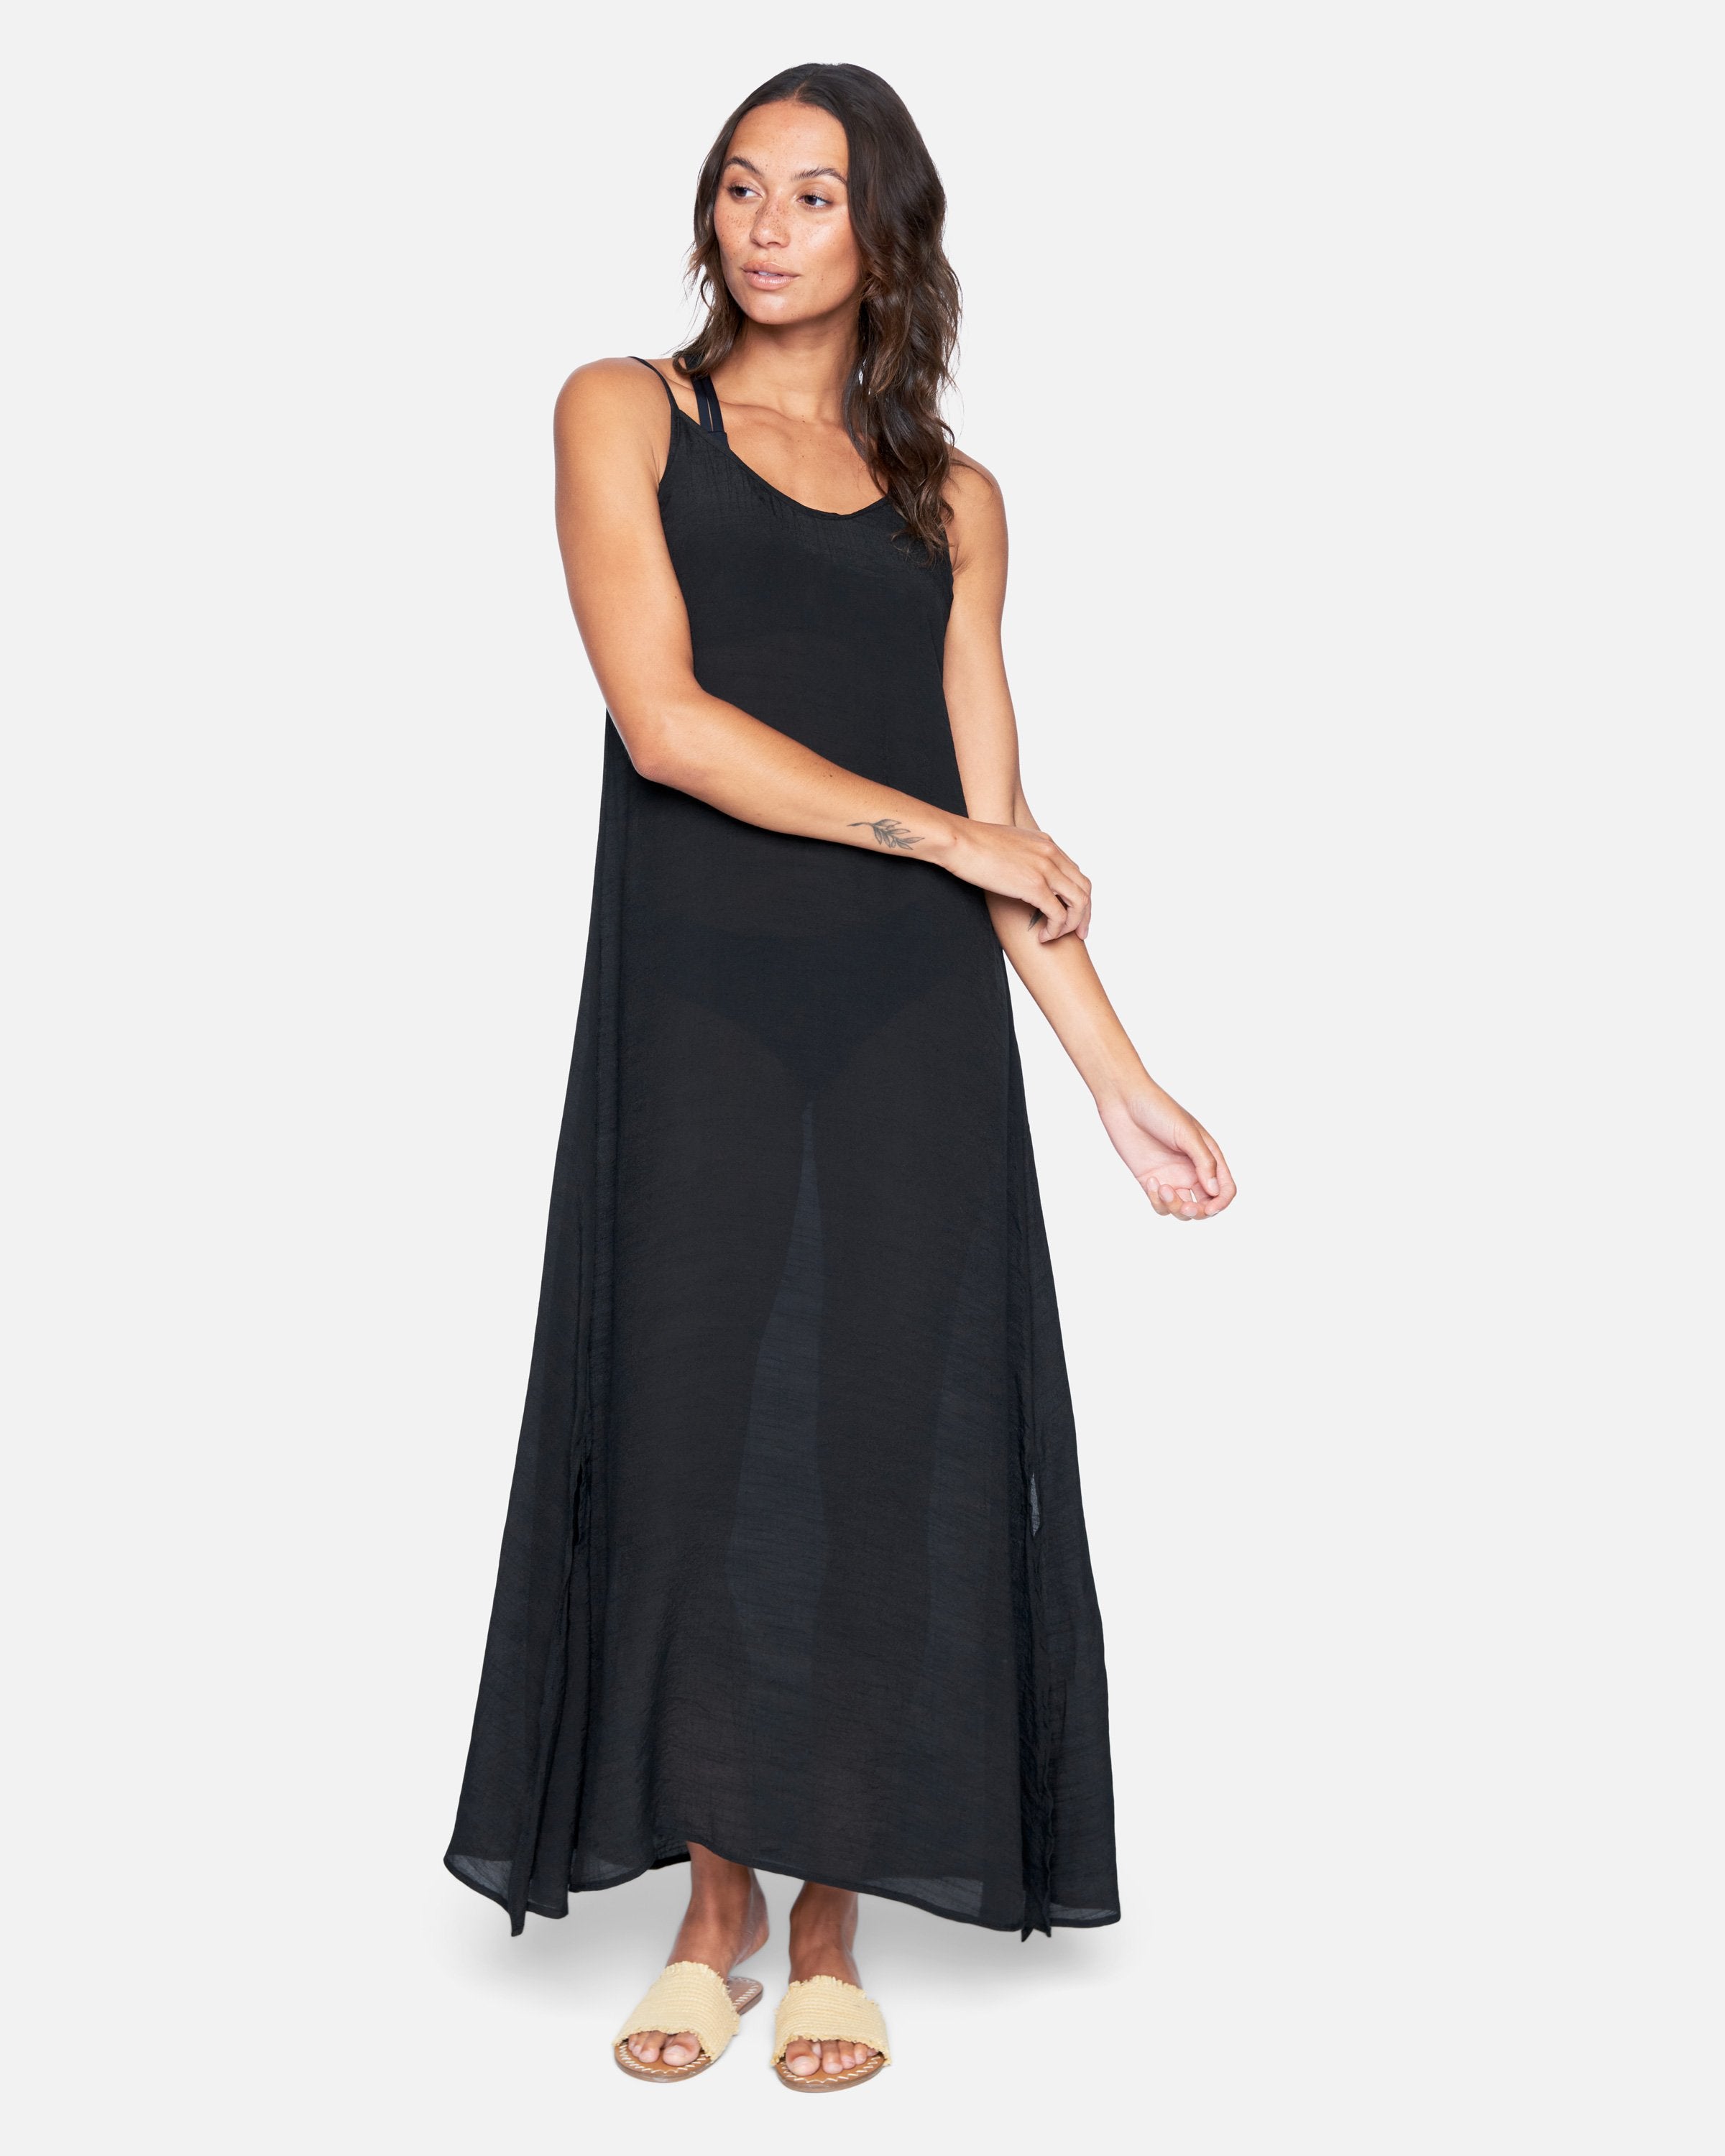 Women's Solid Maxi Coverup in Black, Size XS